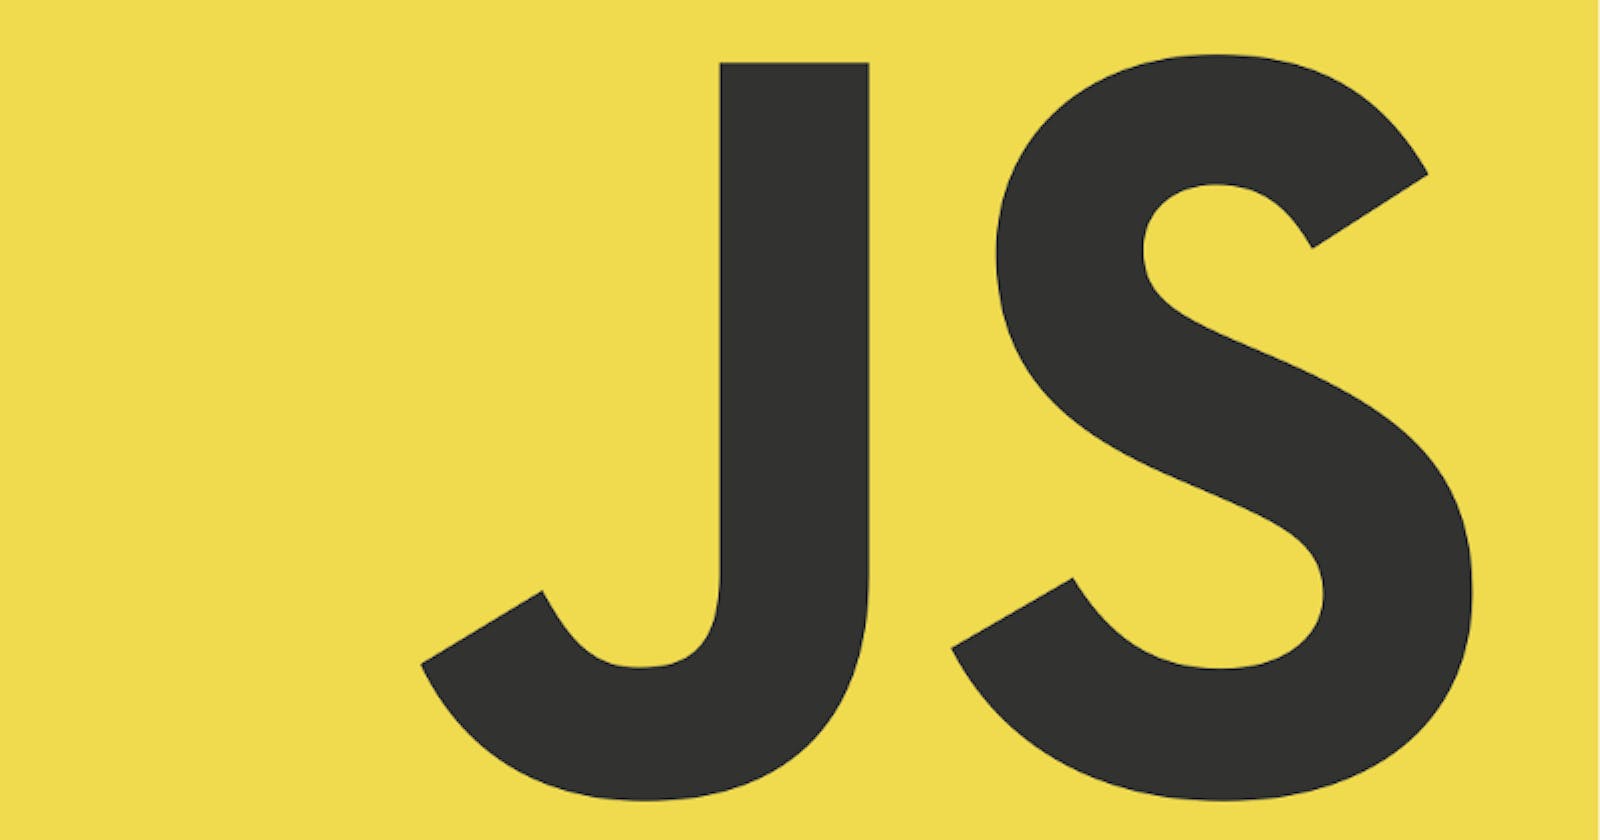 Should you learn JavaScript in 2018?